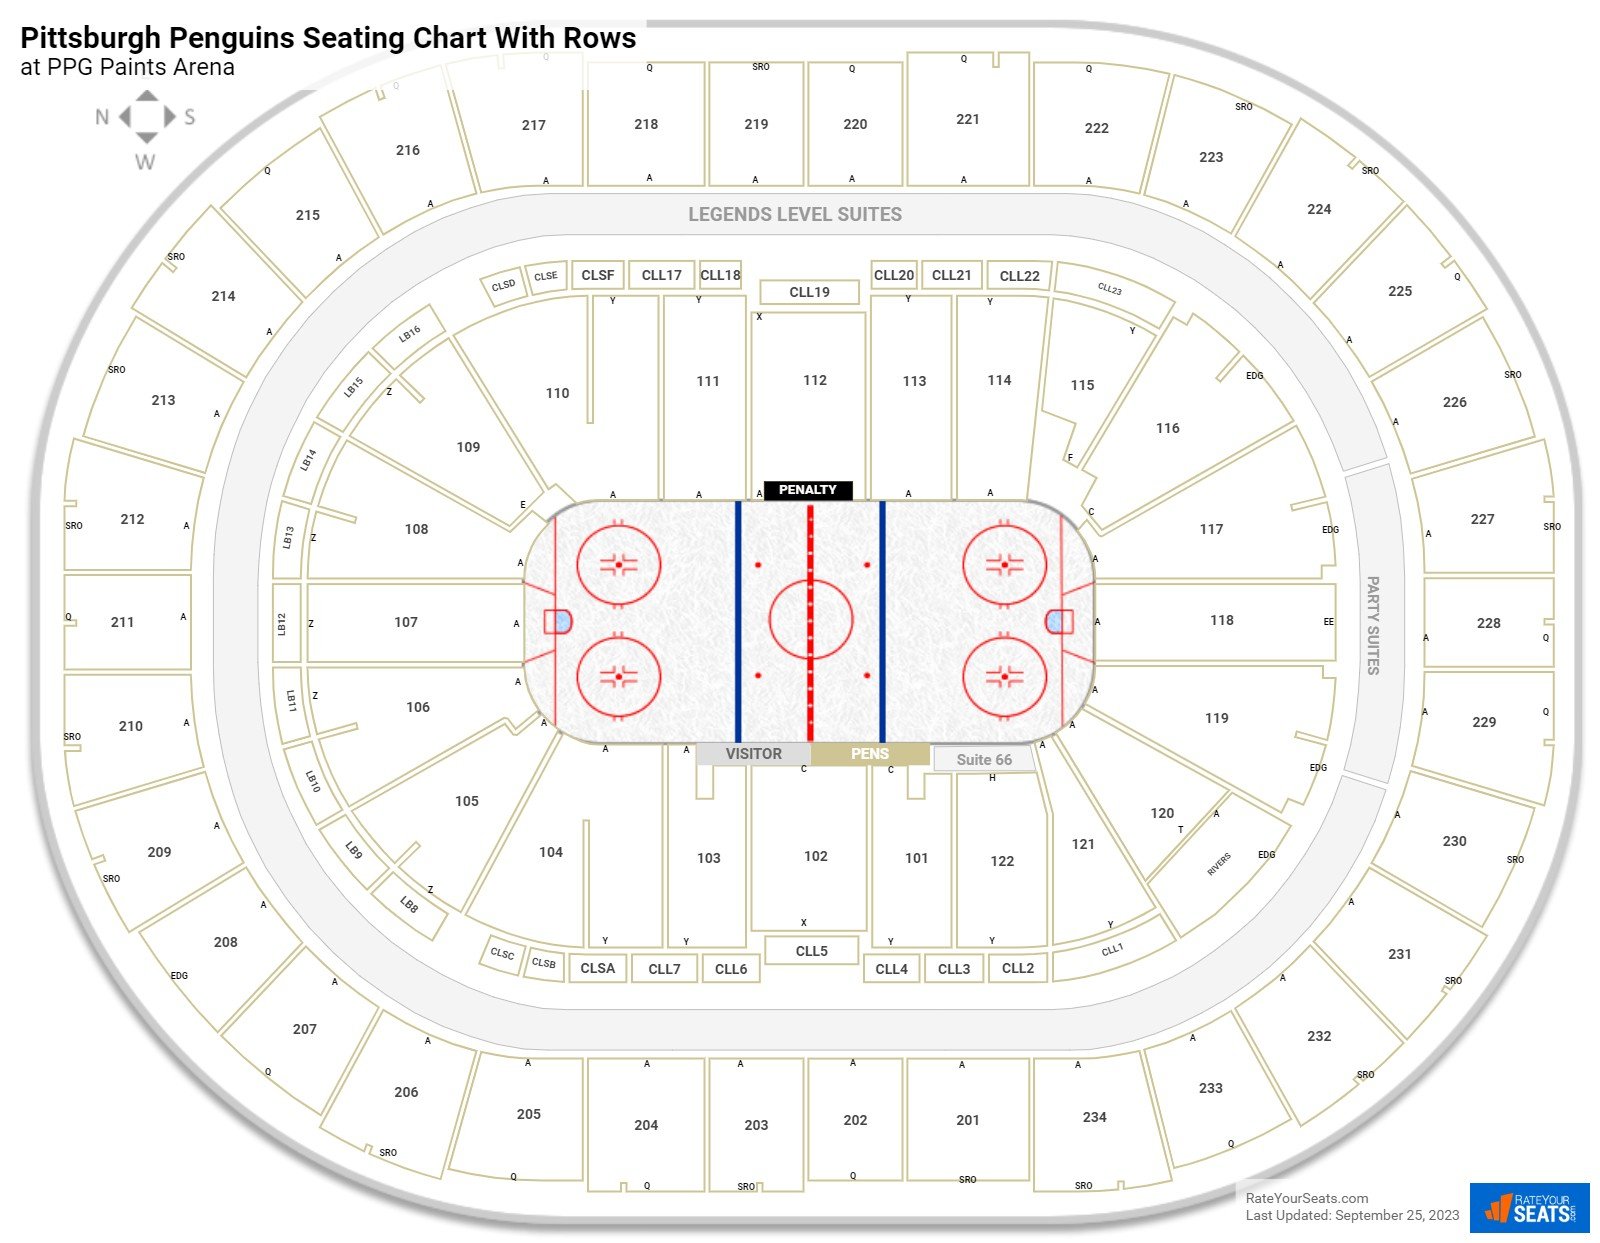 Breakdown Of The PPG Paints Arena Seating Chart - rta.com.co